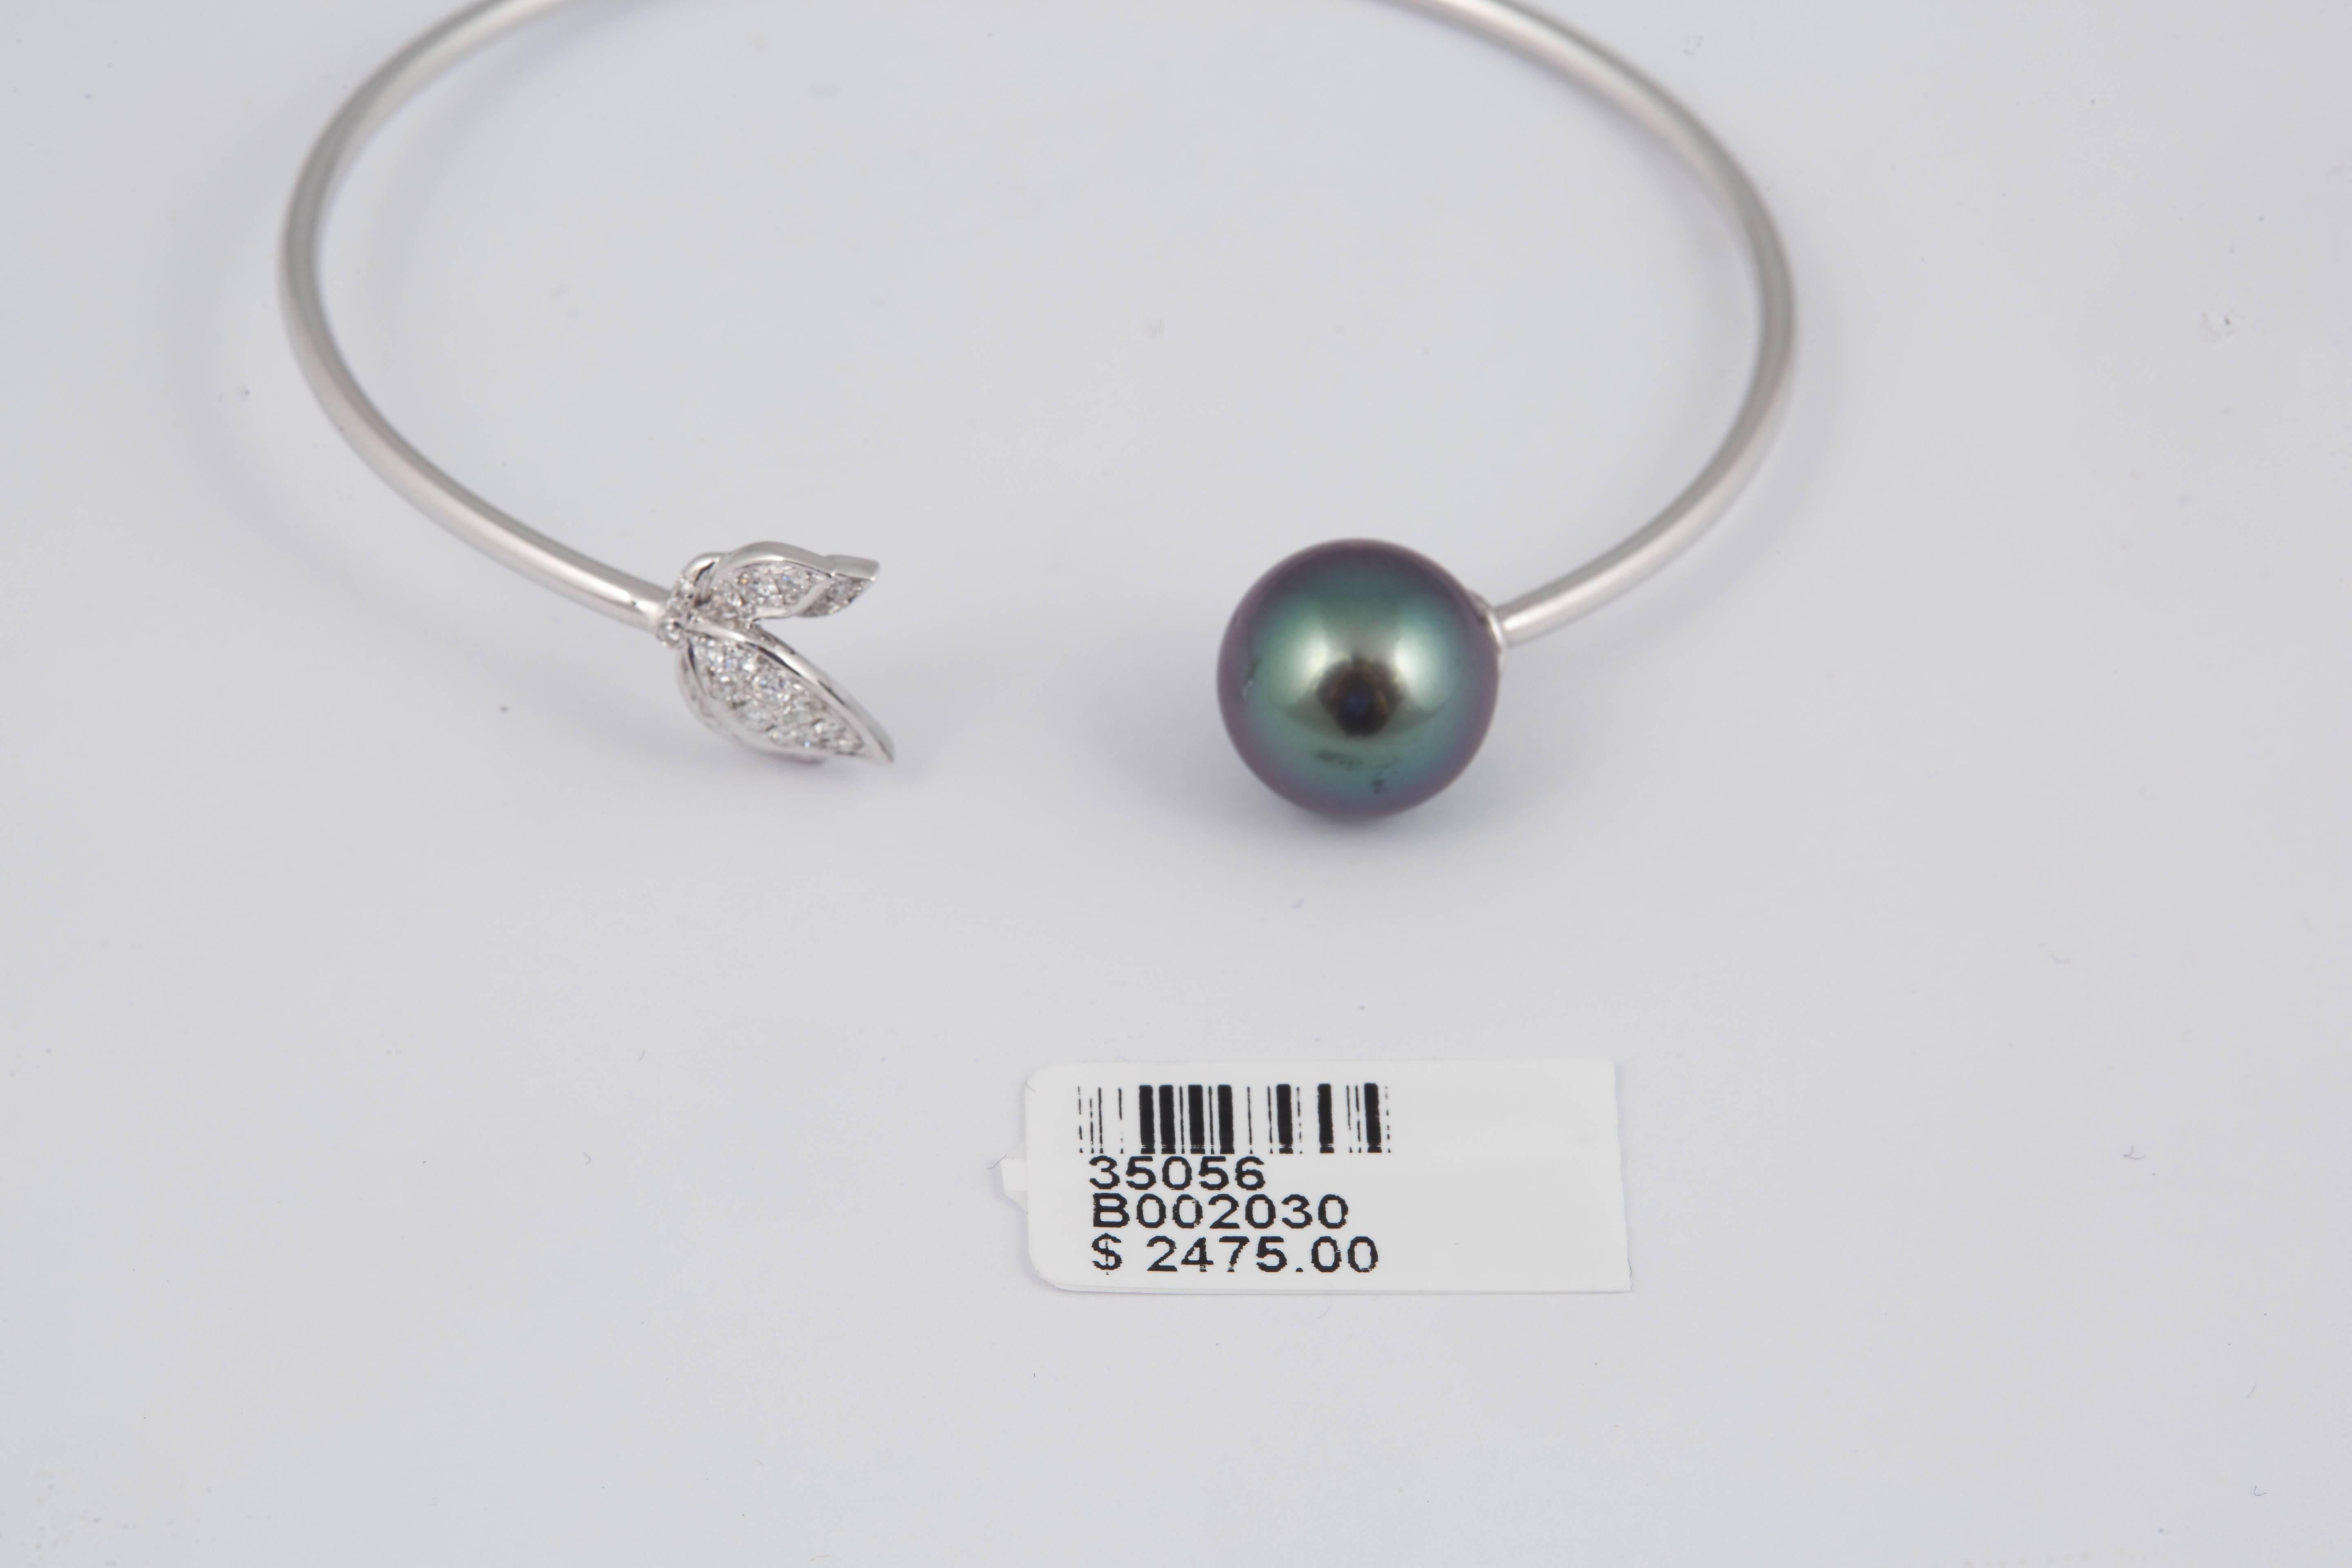 18K White Gold bangle bracelet featuring 23 round brilliants weighing 0.22 Carats and one Tahitian Pearl measuring 11-12 mm.